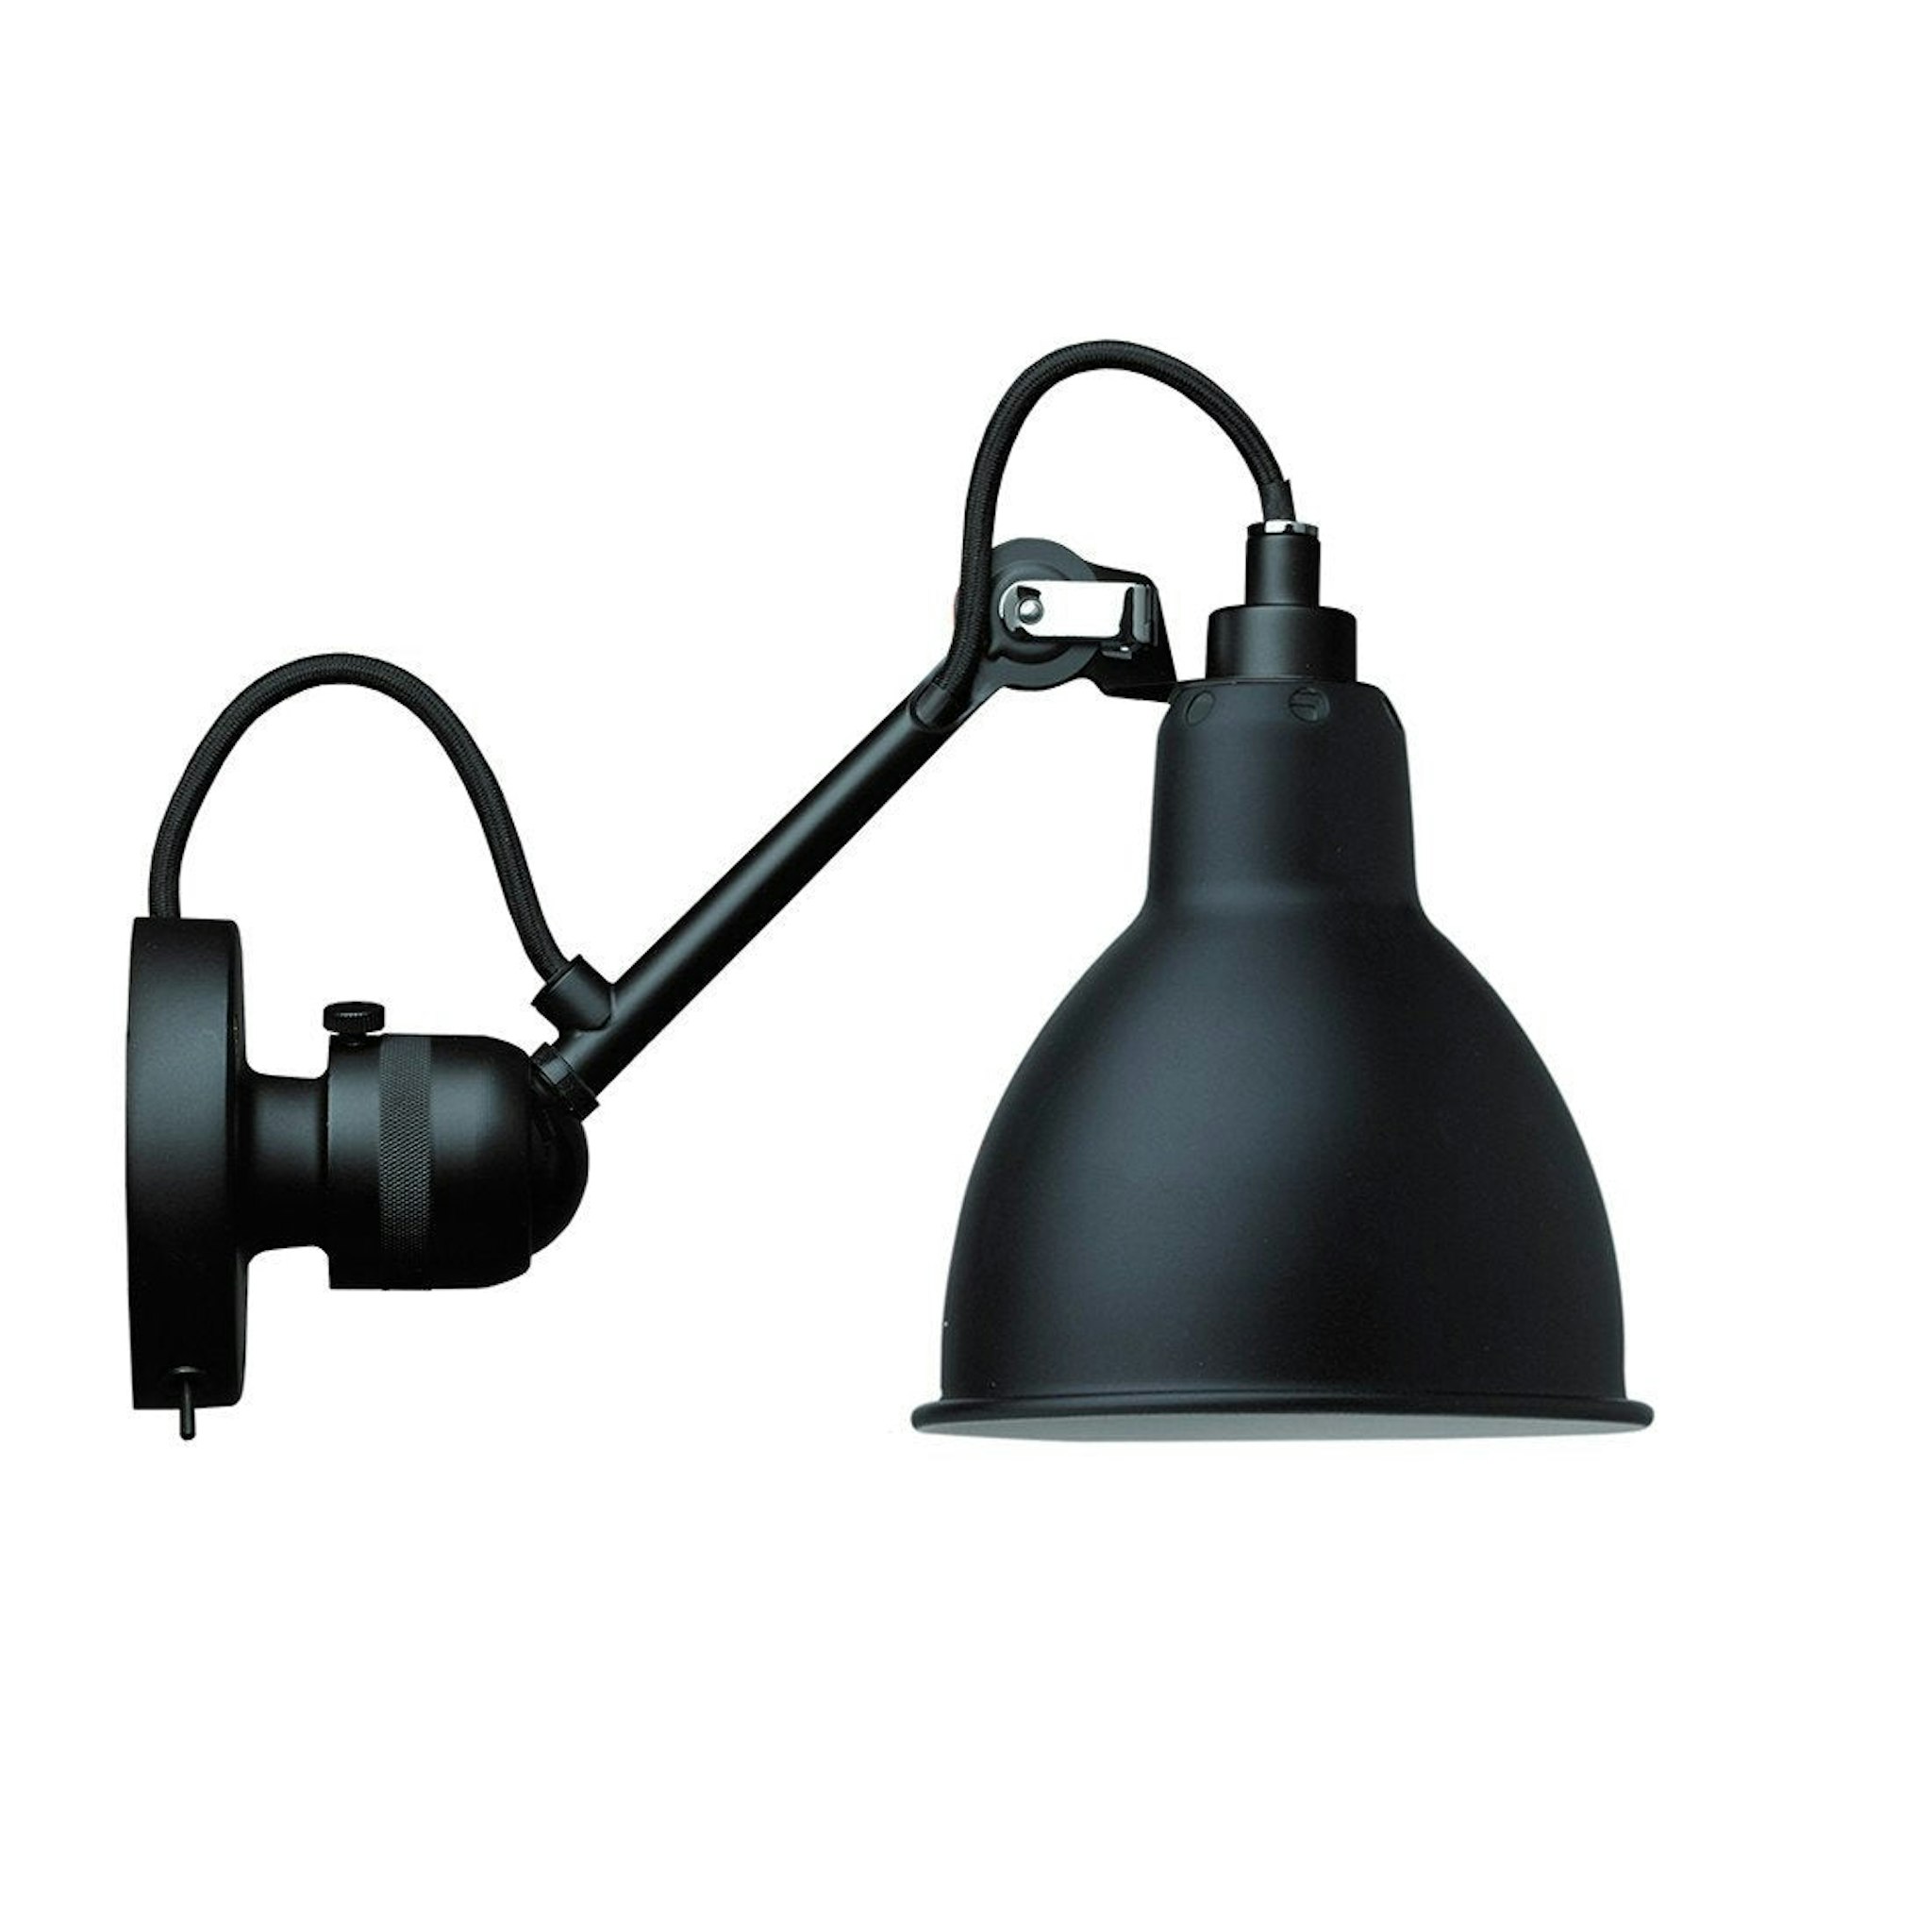 Lampe Gras 304 / hard wired by La Lampe Gras - Clearance